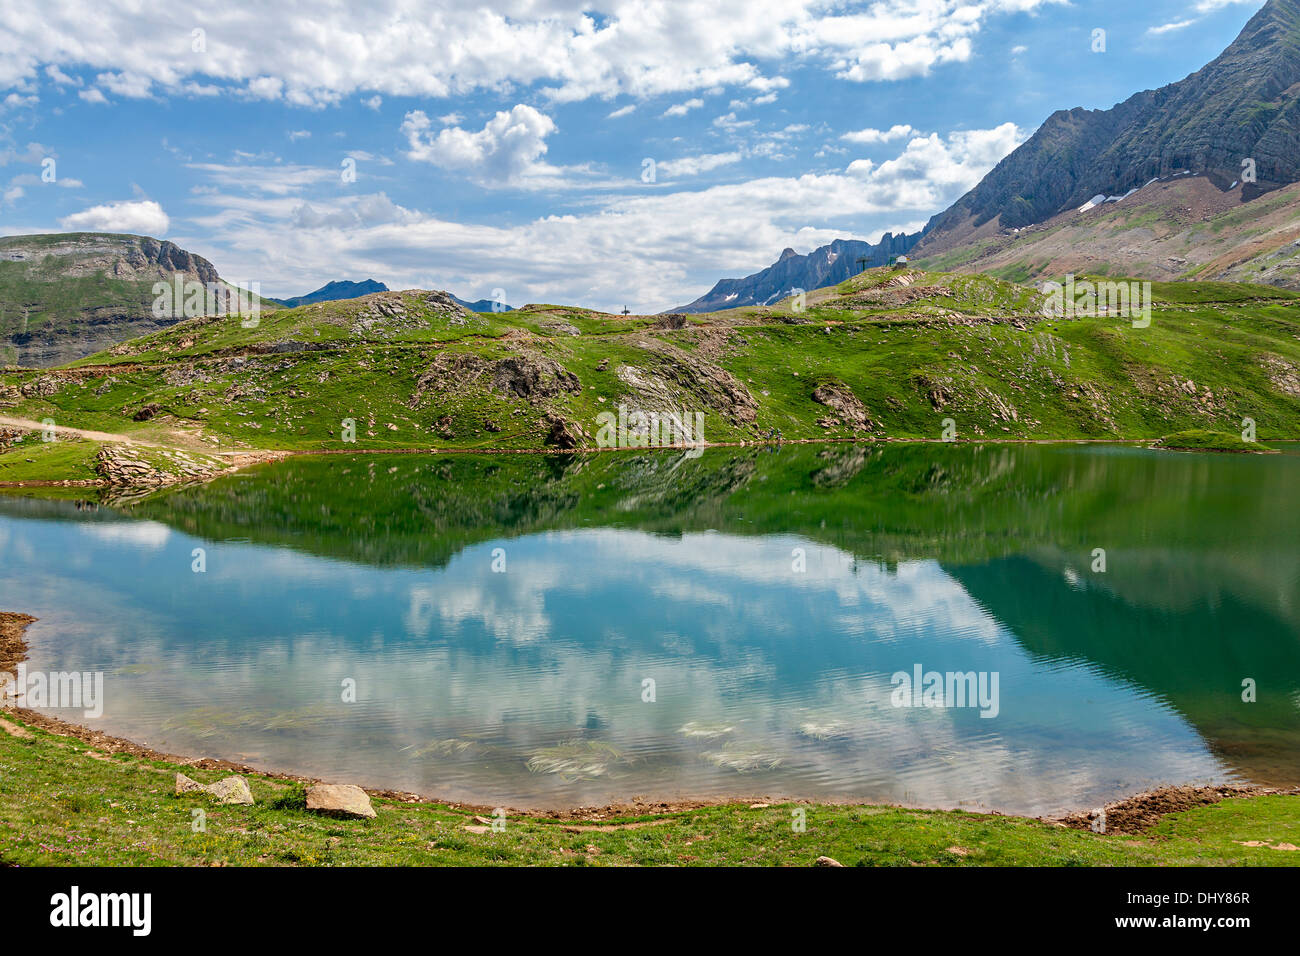 Reflections on the Asnos lake in Panticosa, Spanish Pyrenees Stock Photo